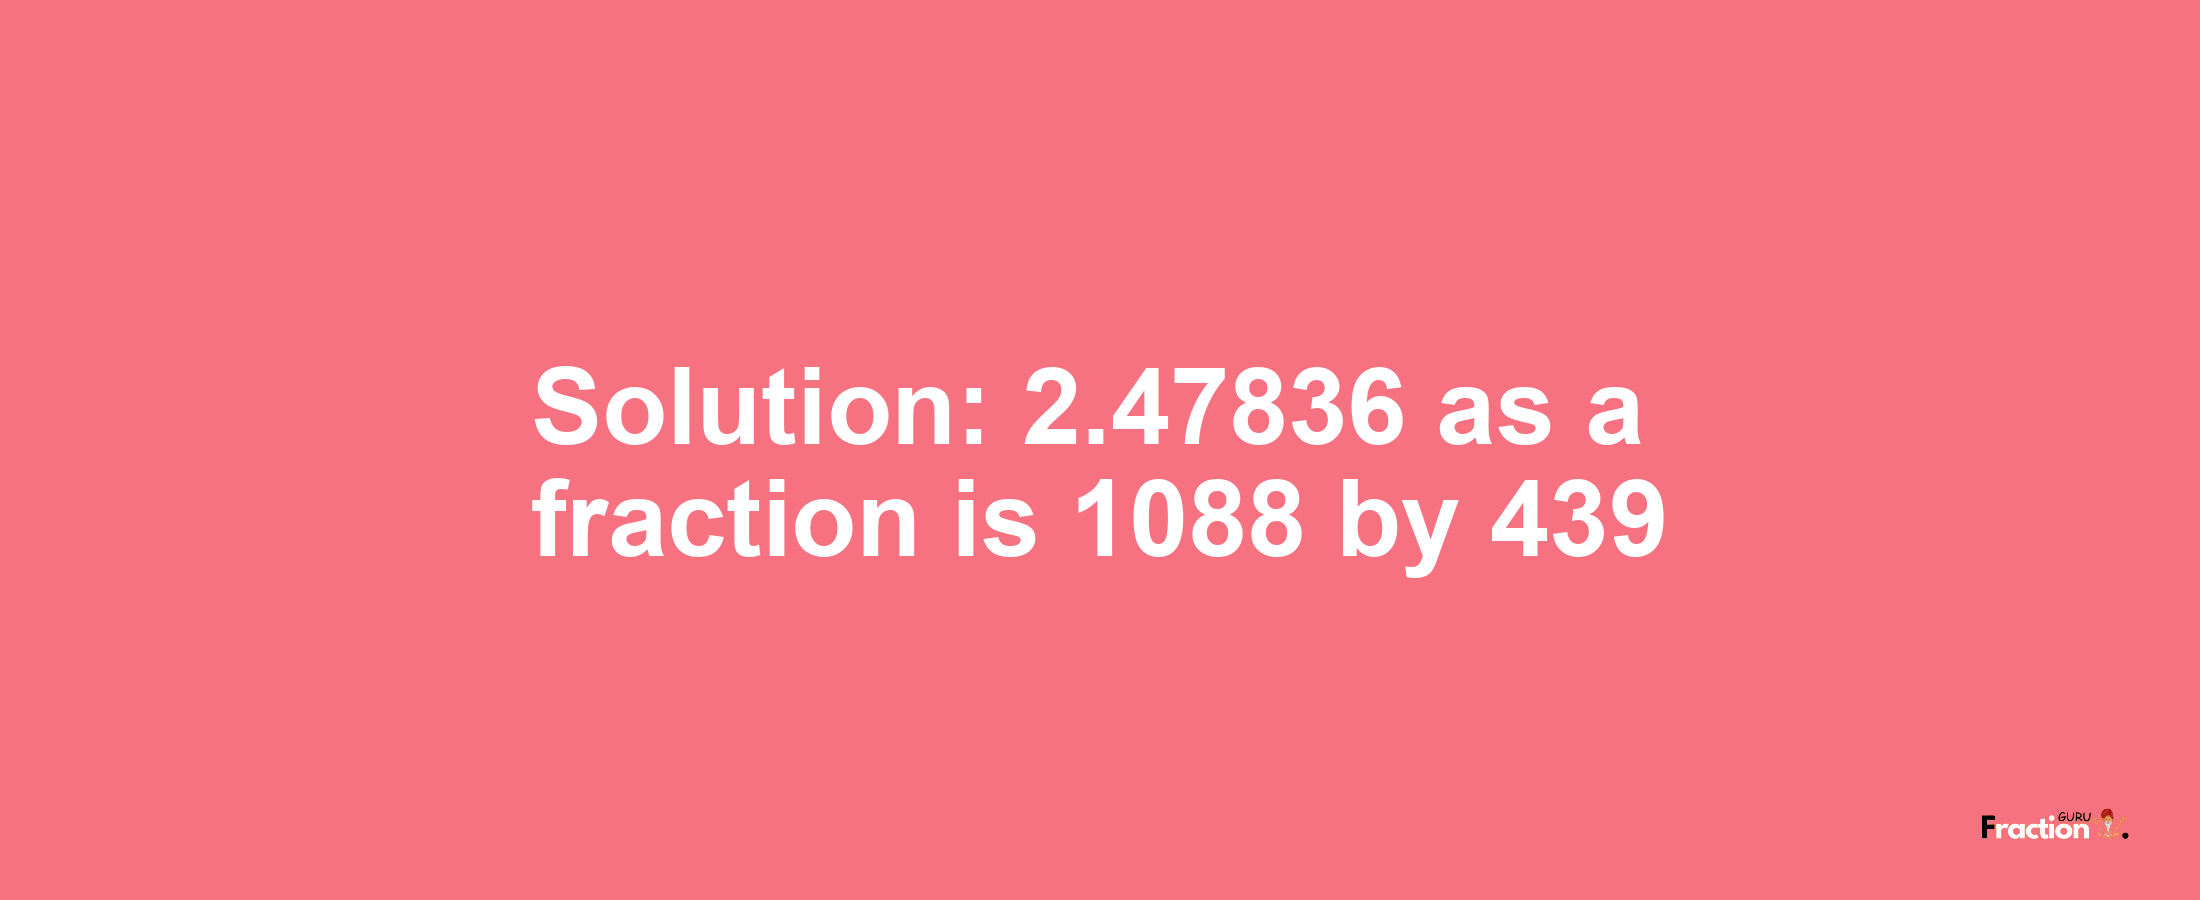 Solution:2.47836 as a fraction is 1088/439